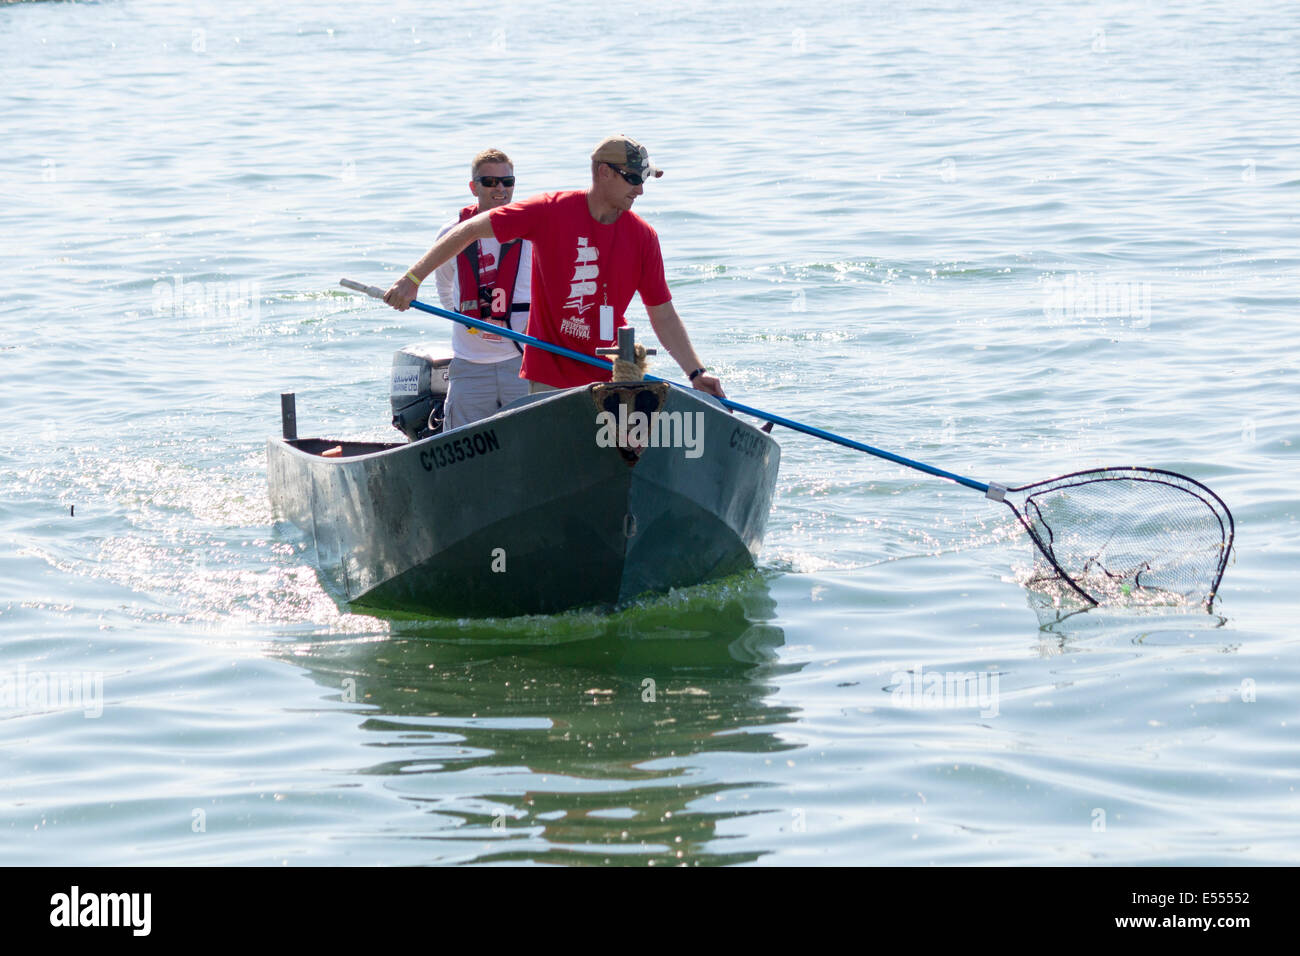 Two young men in small watercraft using net to clear debris out of the water. Stock Photo